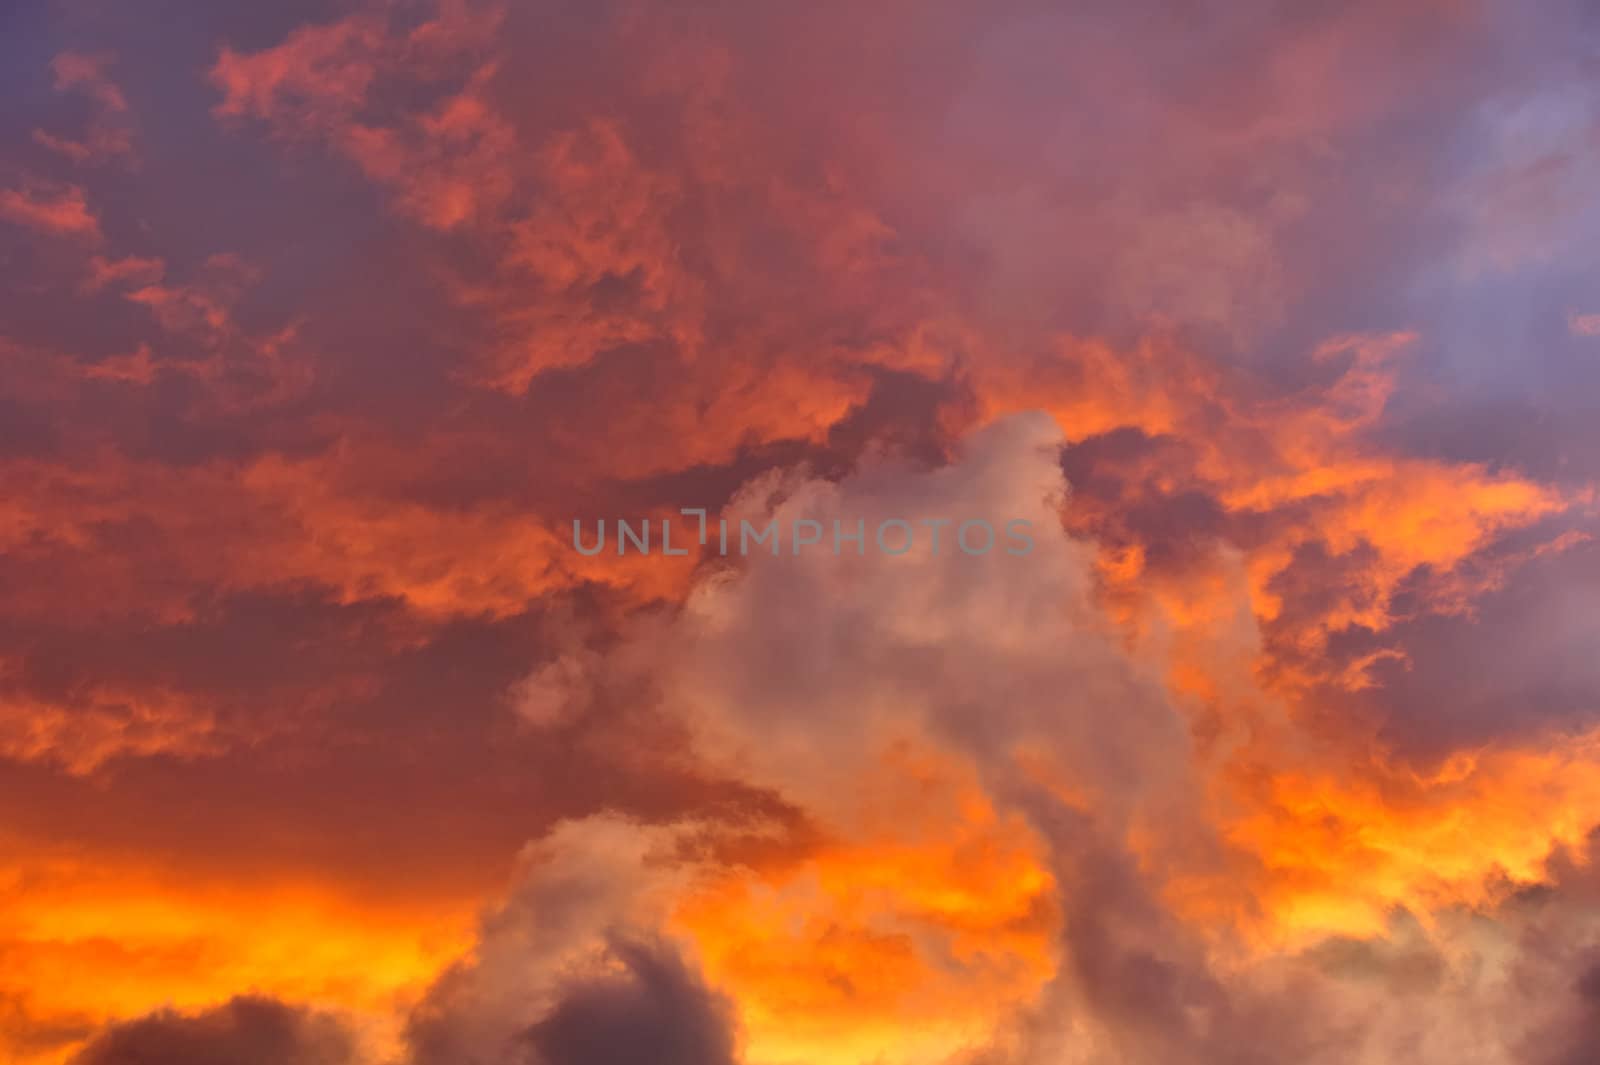 A jumble of stratocumulus clouds at sunset. Suitable as an abstract, natural graphics background.